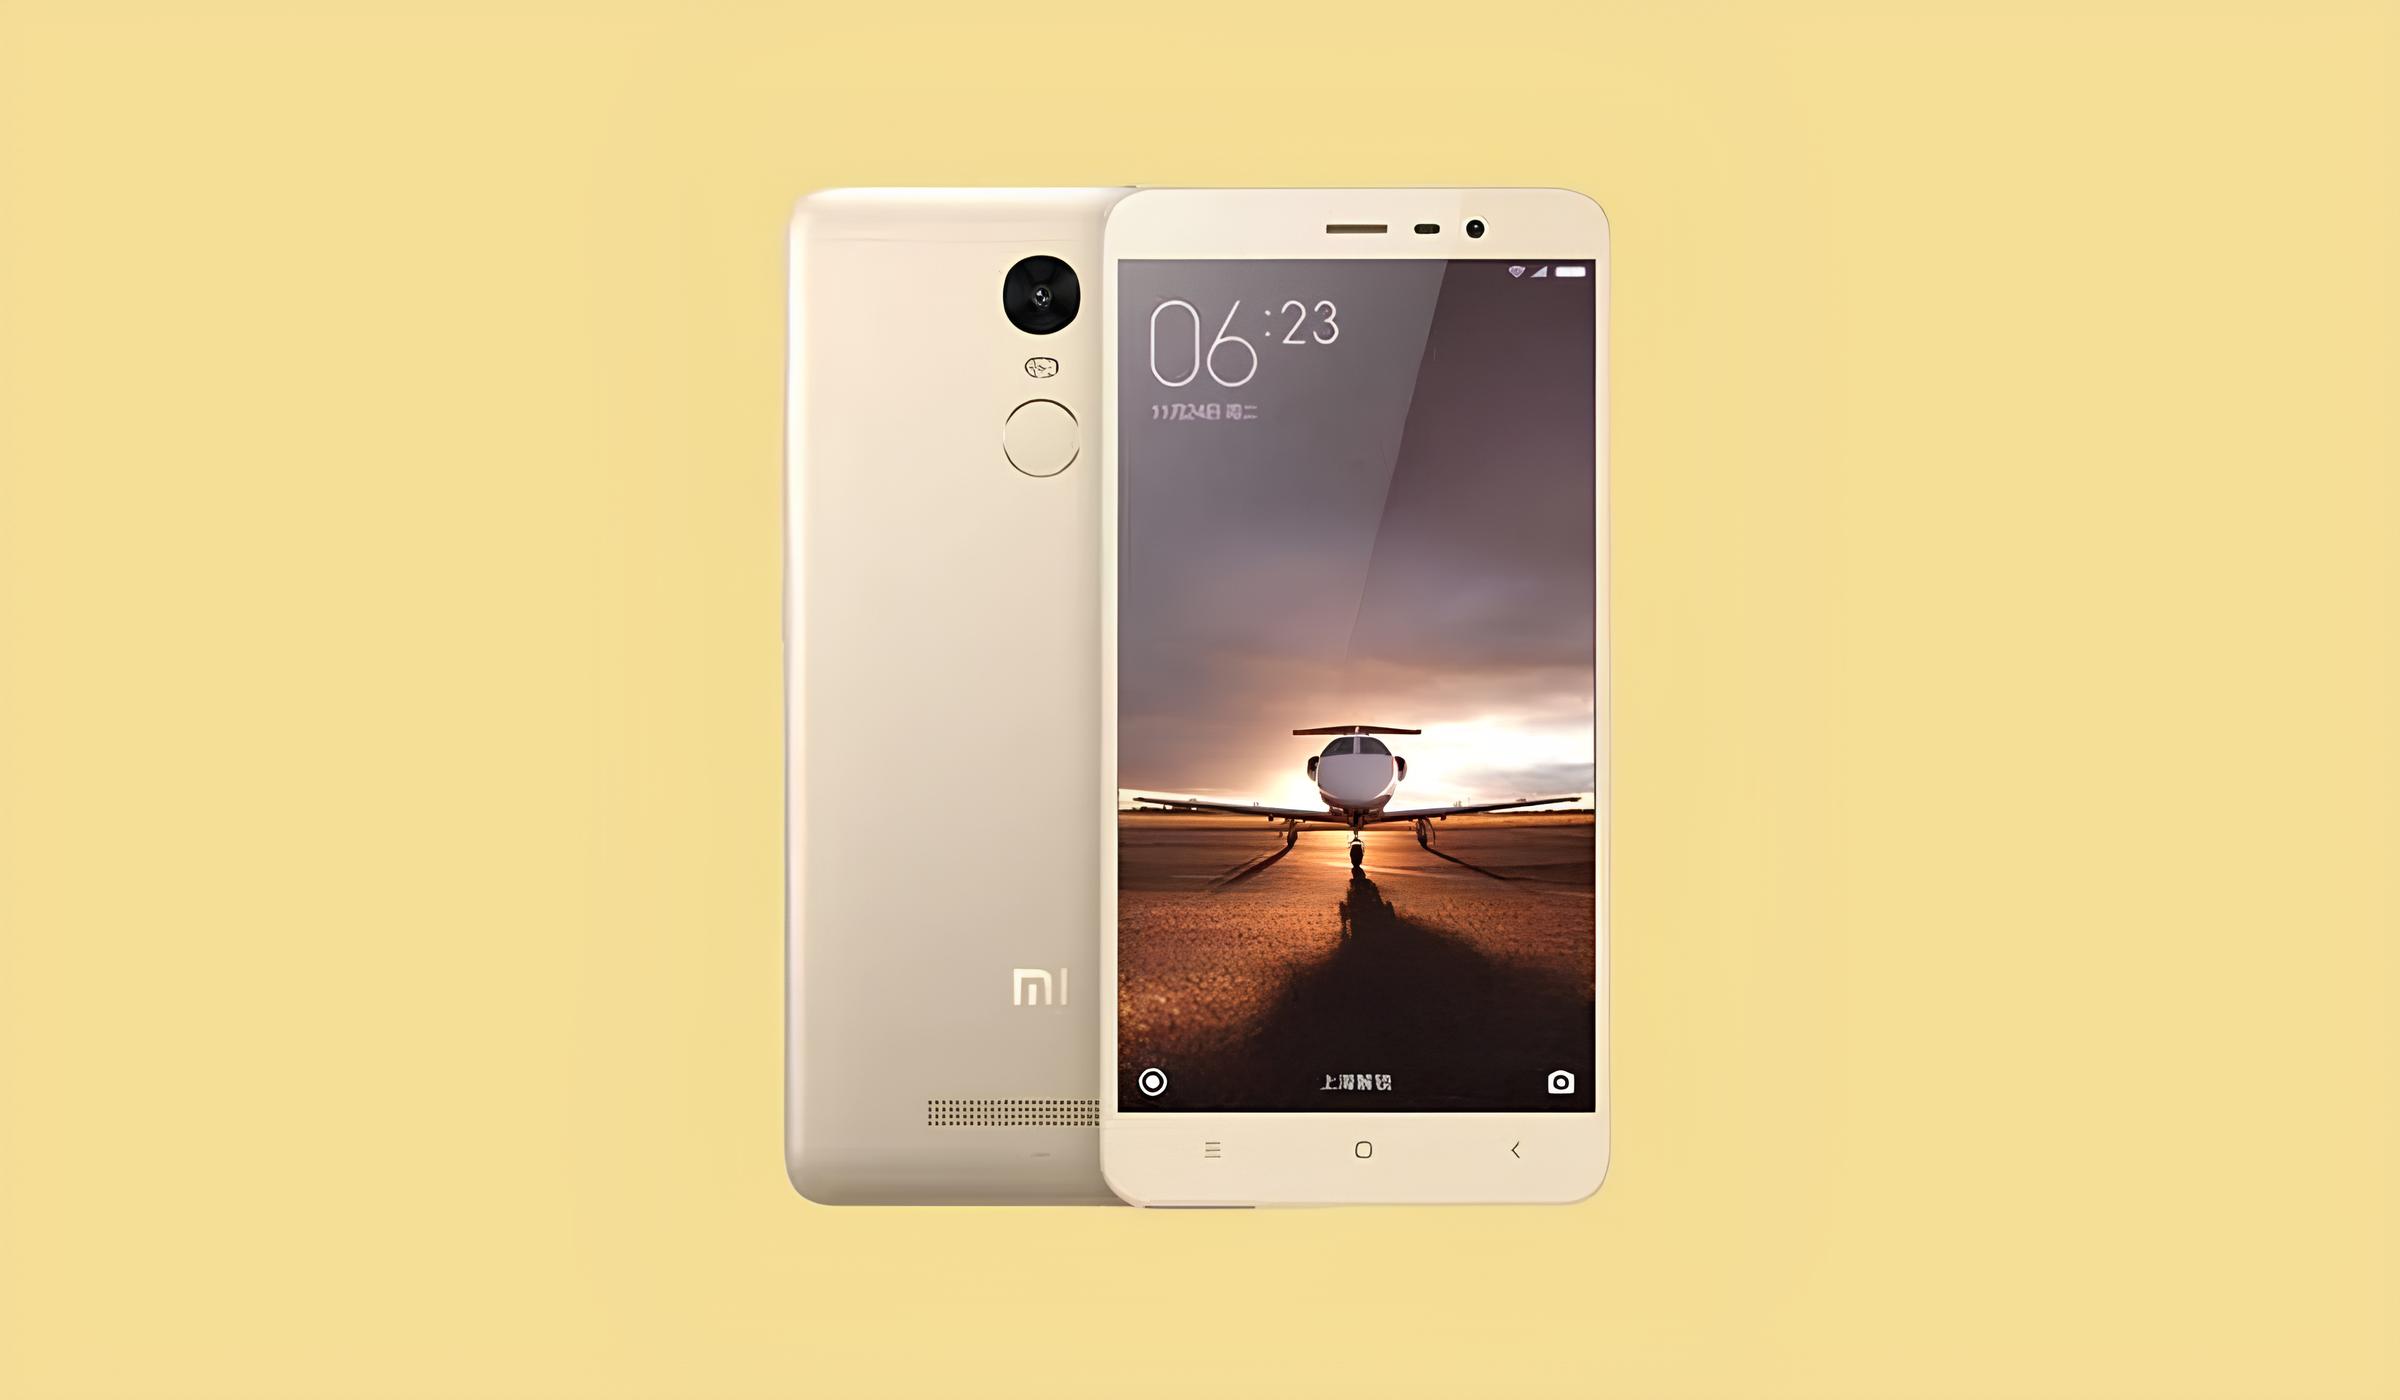 Redmi Note 3 ROM Installation: Step-by-Step Guide